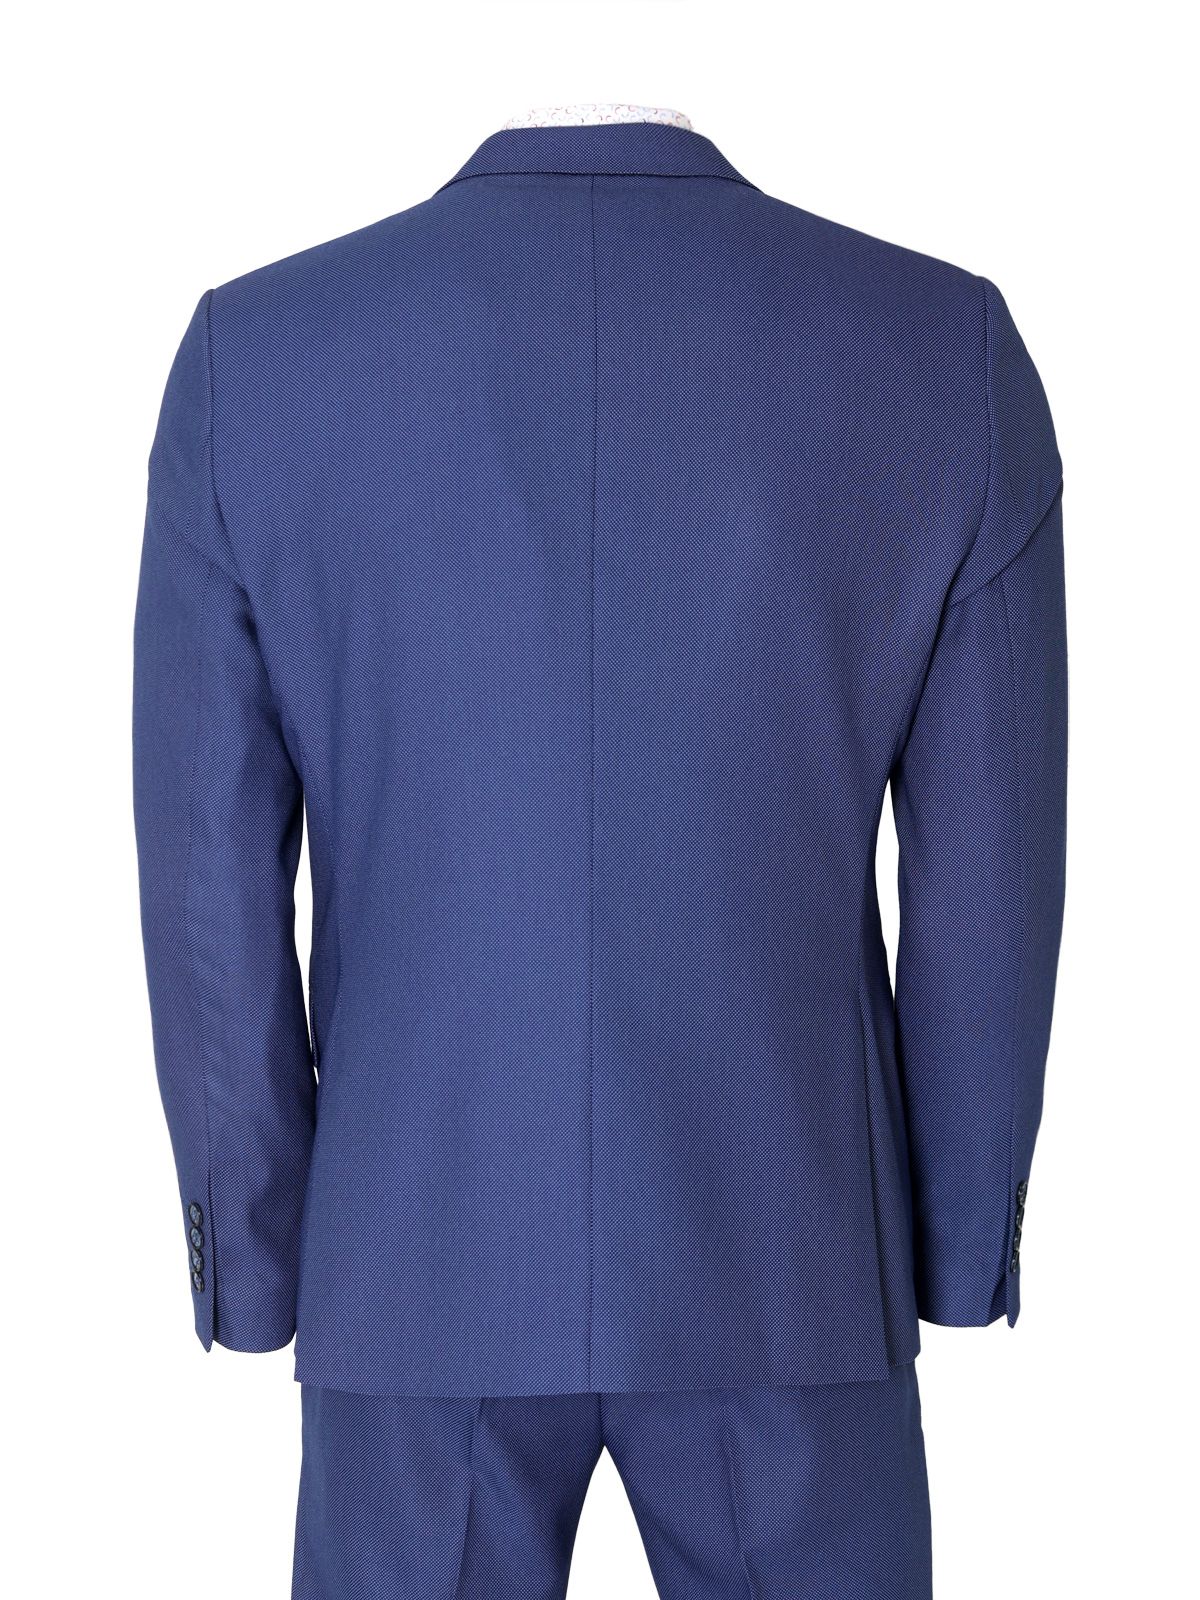 Mens jacket in classic blue - 64127 € 149.60 img2